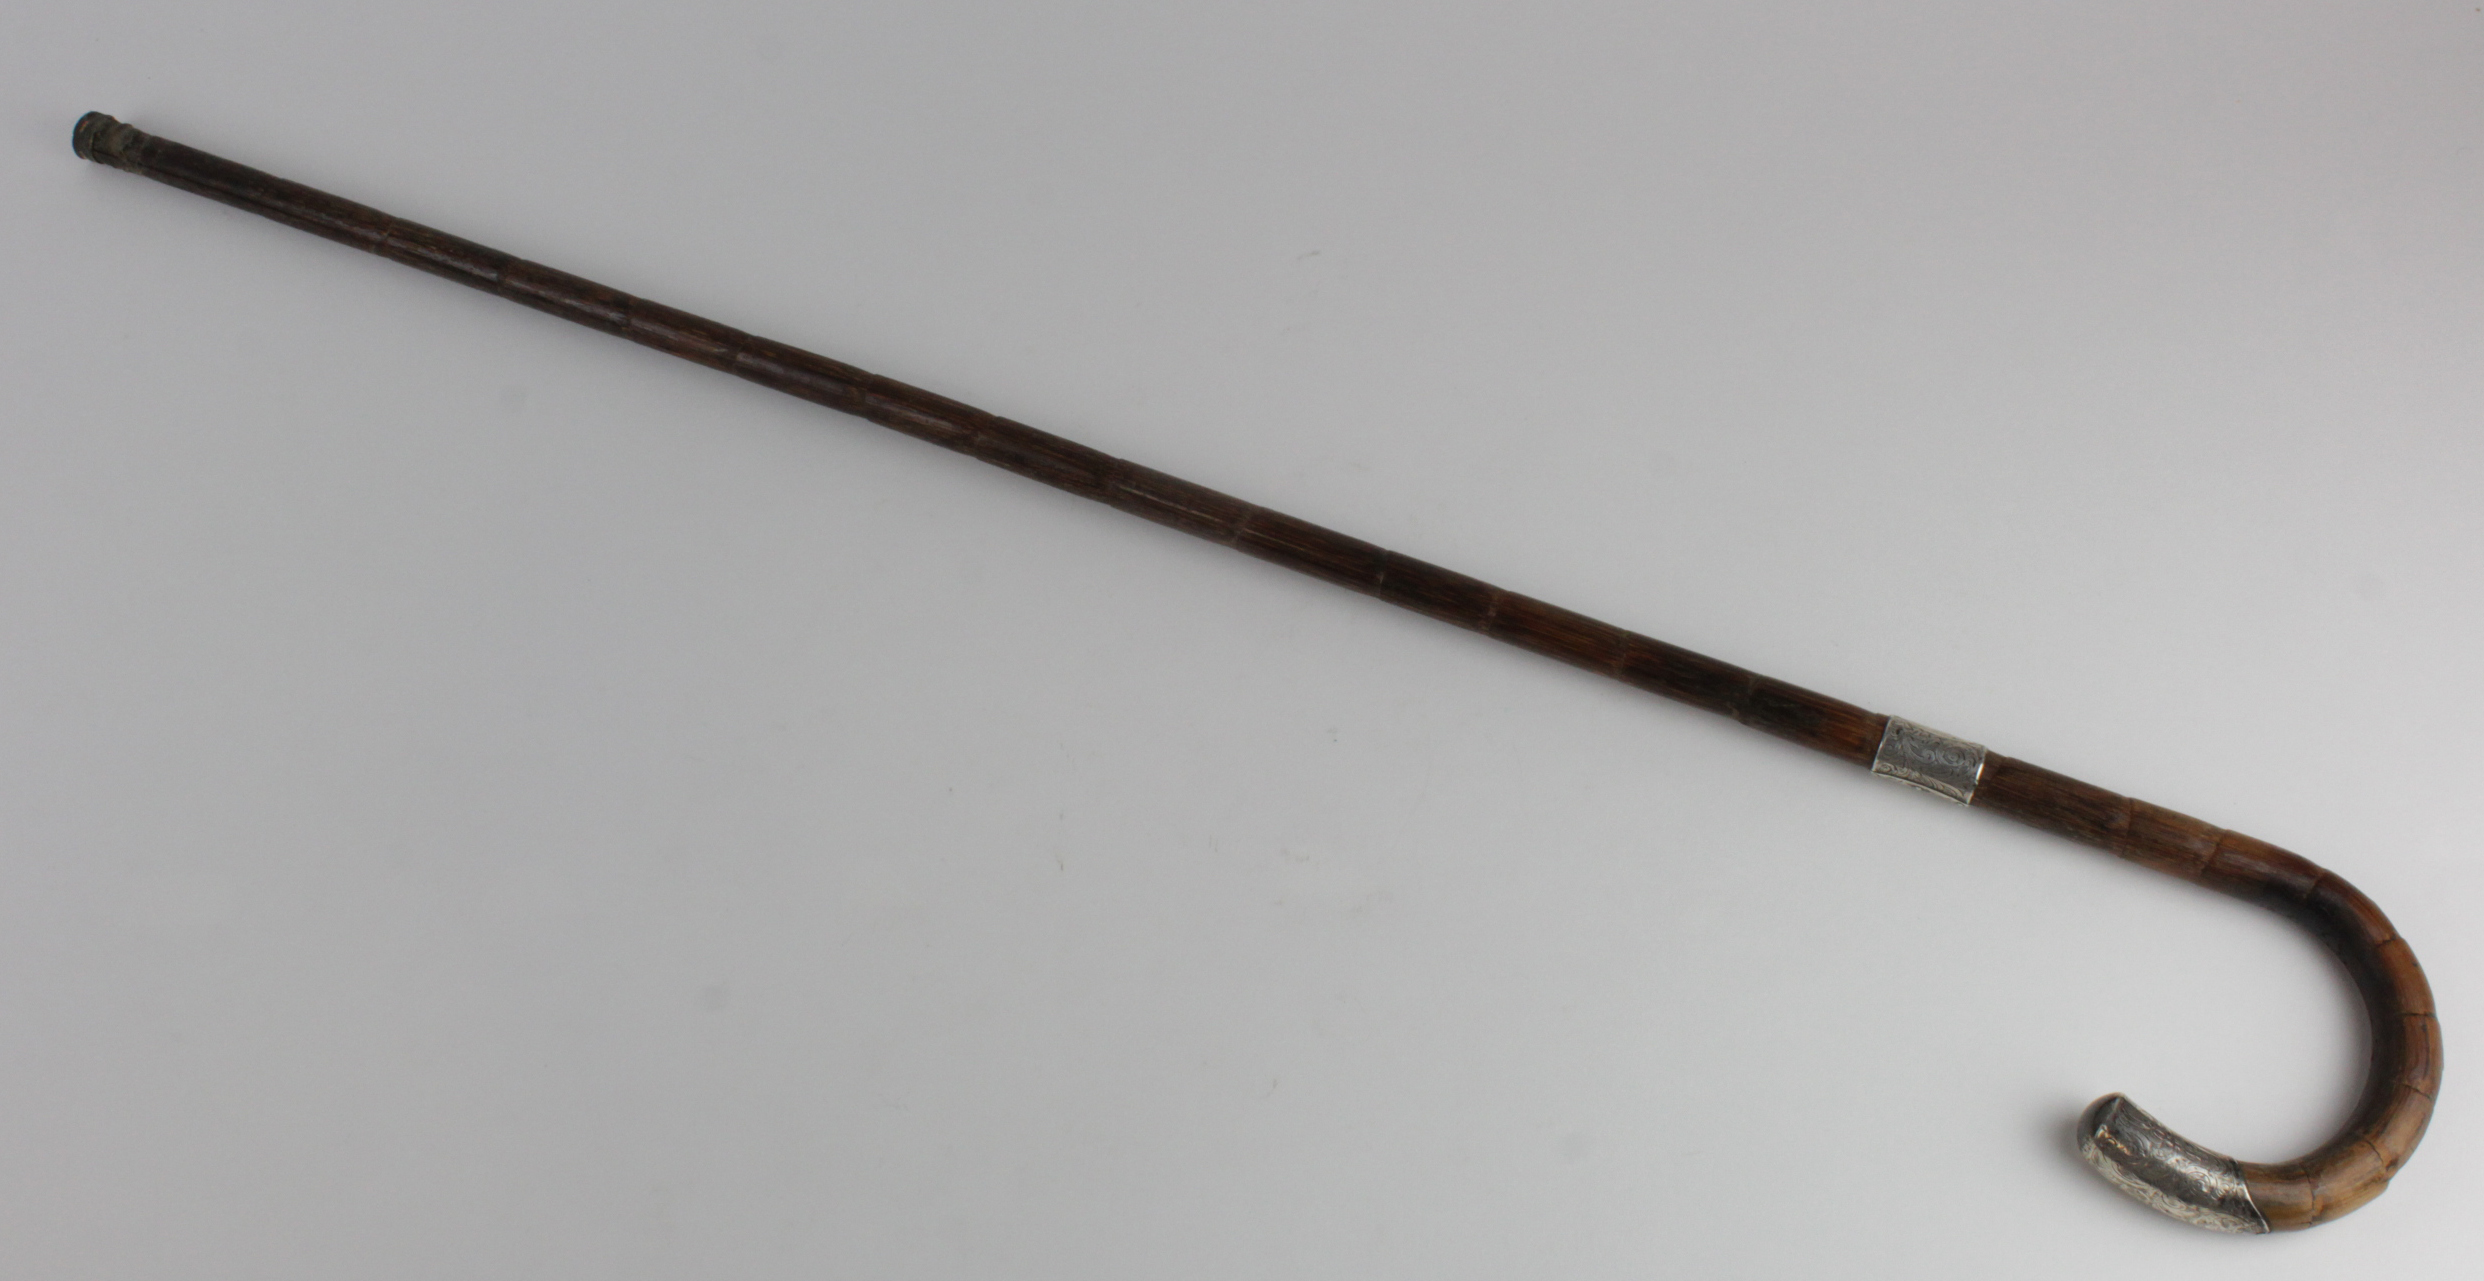 Silver mounted malacca walking stick / cane, hallmarked 'HT, London 1913', length 88cm approx.